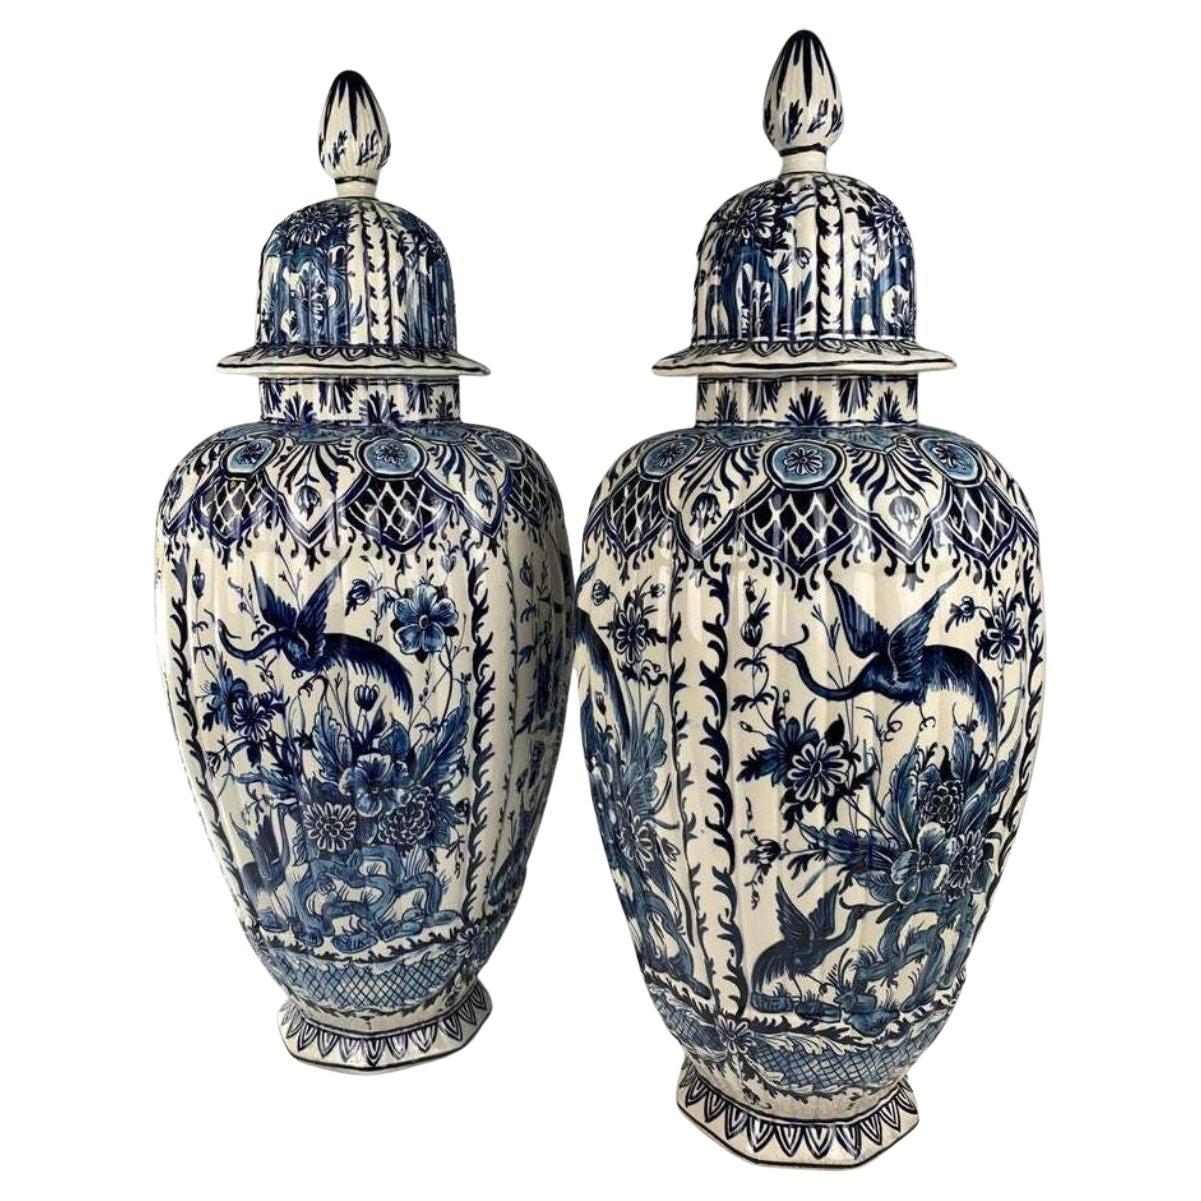 Pair of Large Blue and White Dutch Delft Jars Made Netherlands Late 19th Century